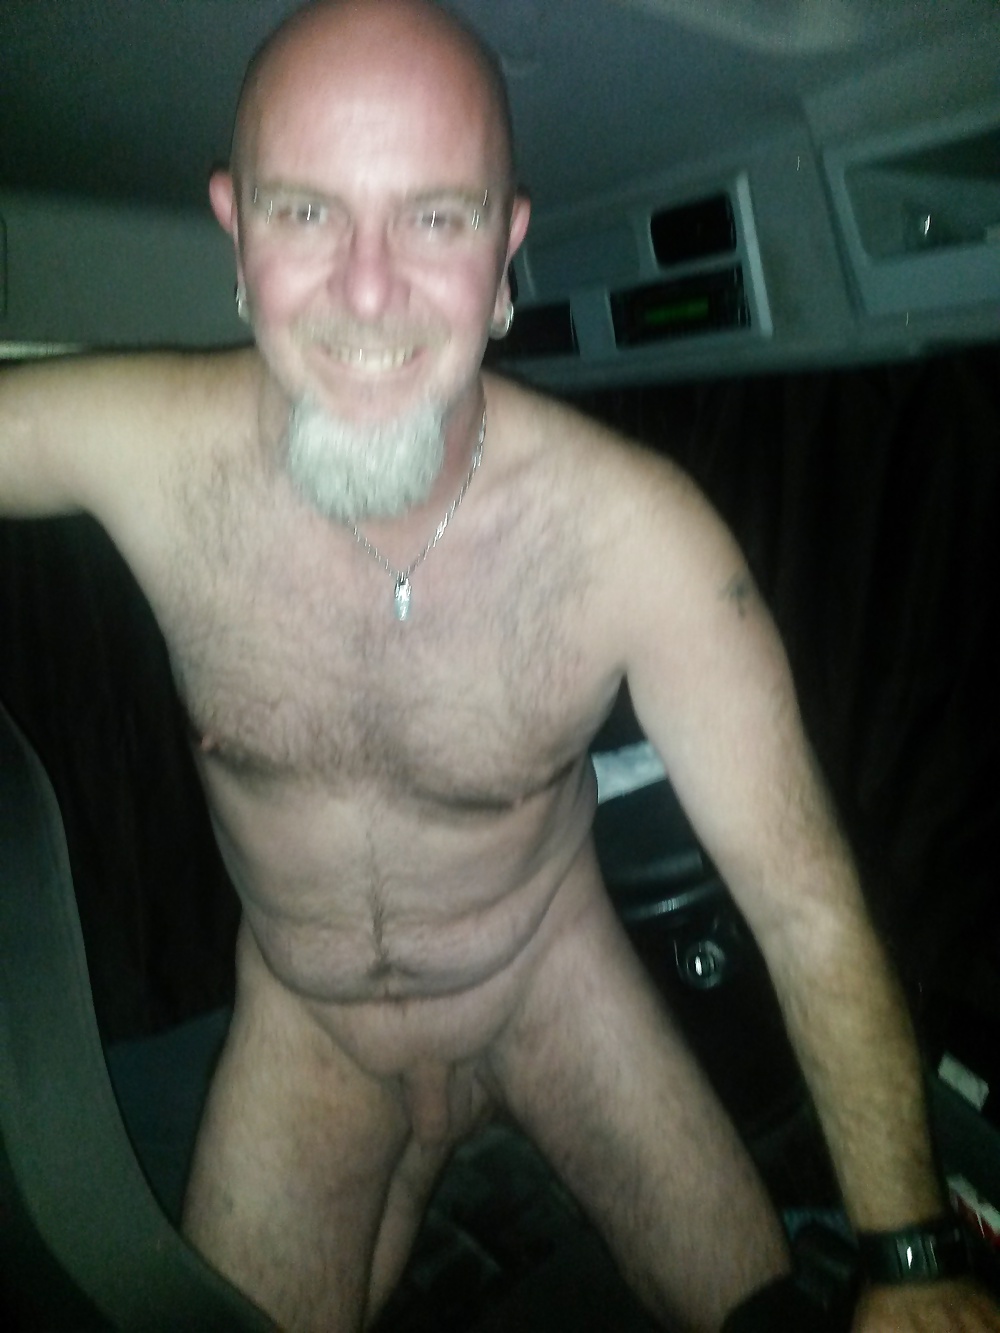 Trucking,licking and fucking all holes #28355431